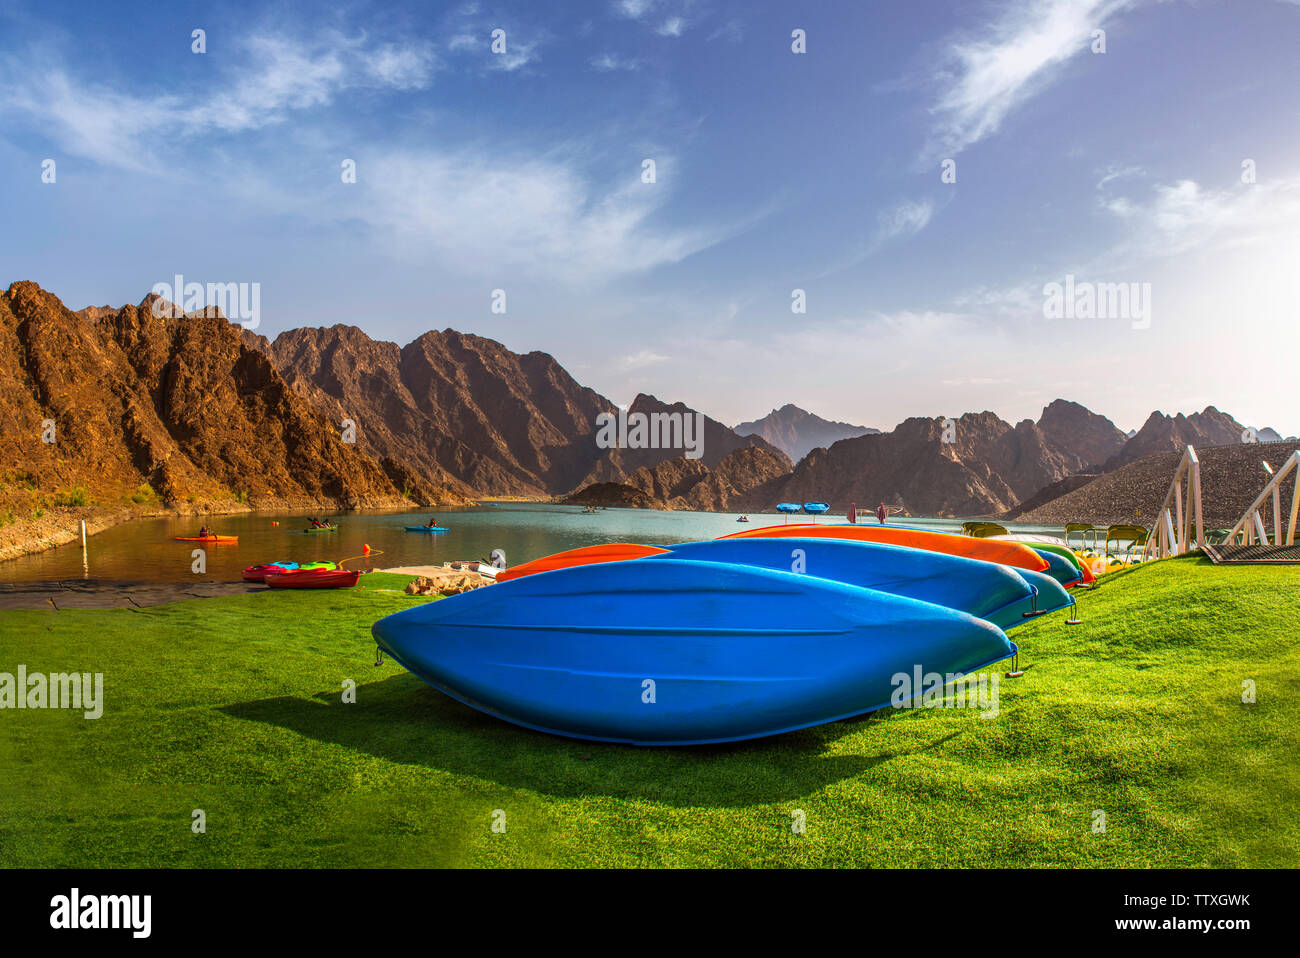 Famous tourist attraction of United Arab Emirates Hatta Dam amazing scenery and best place to enjoy kayaking  and other water adventure activities Stock Photo